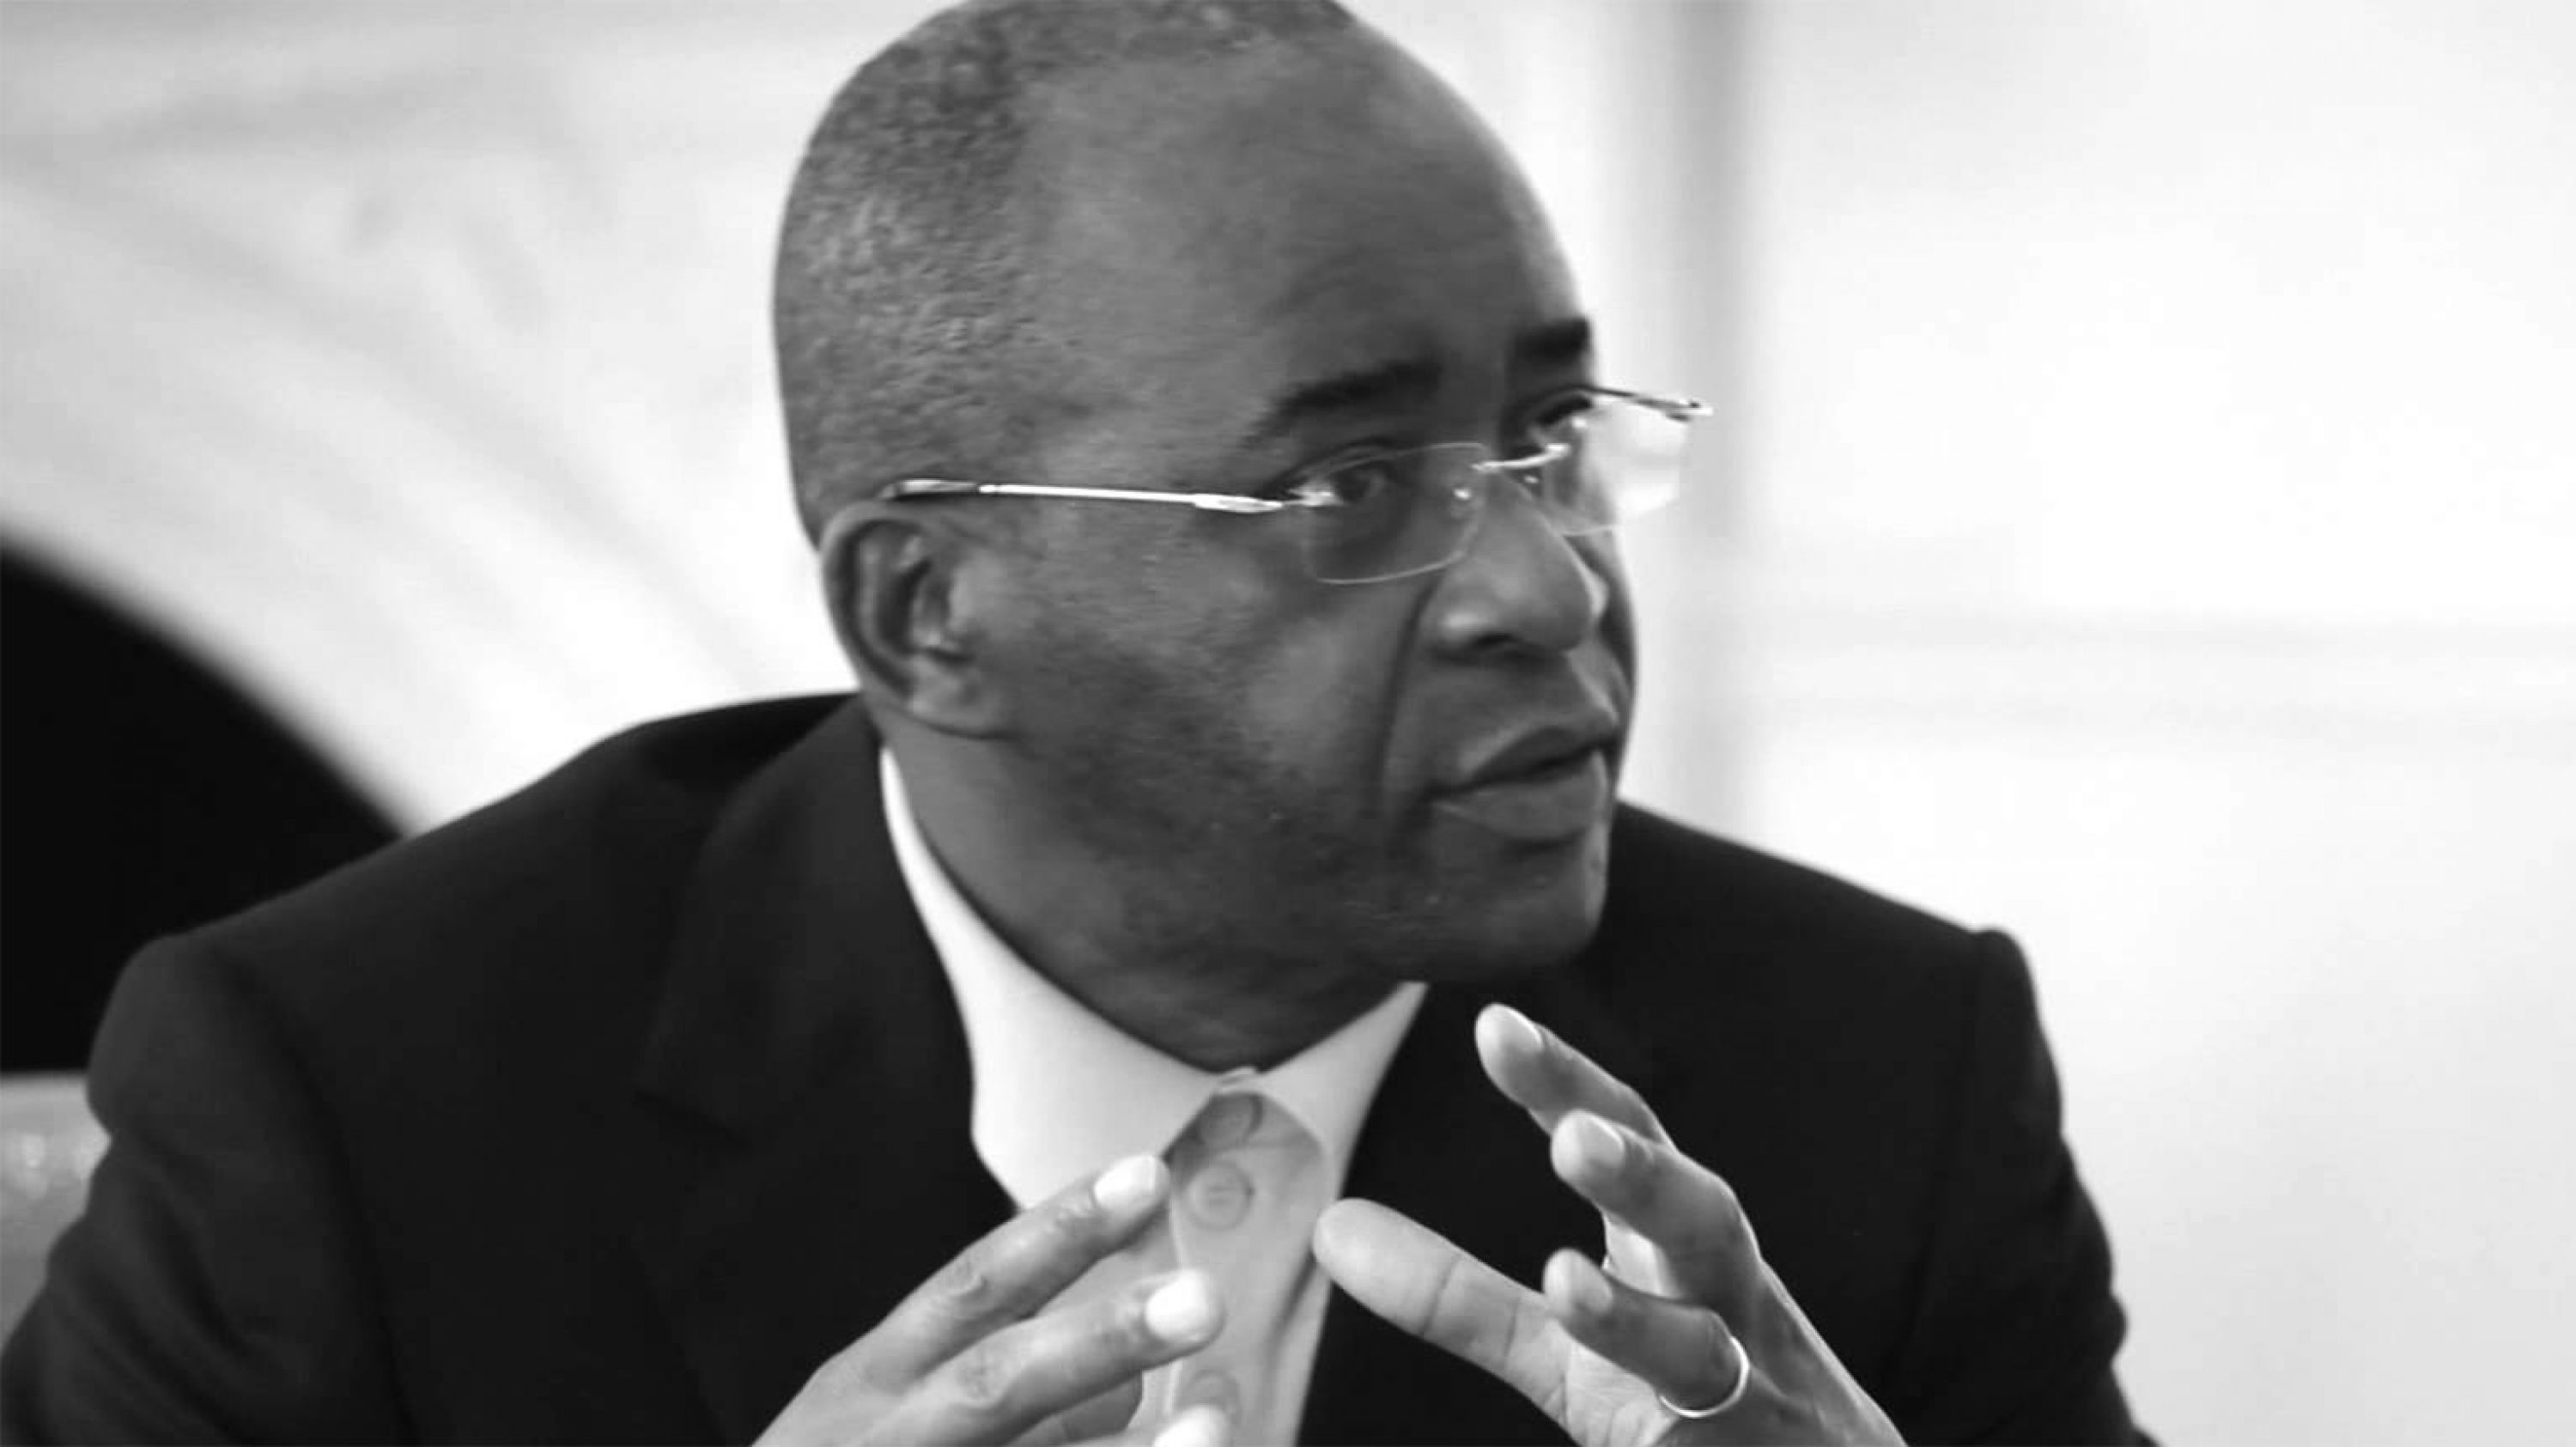 “Always be conscious that you are setting a tone and a value system.” - How Strive Masiyiwa Empowers Africa